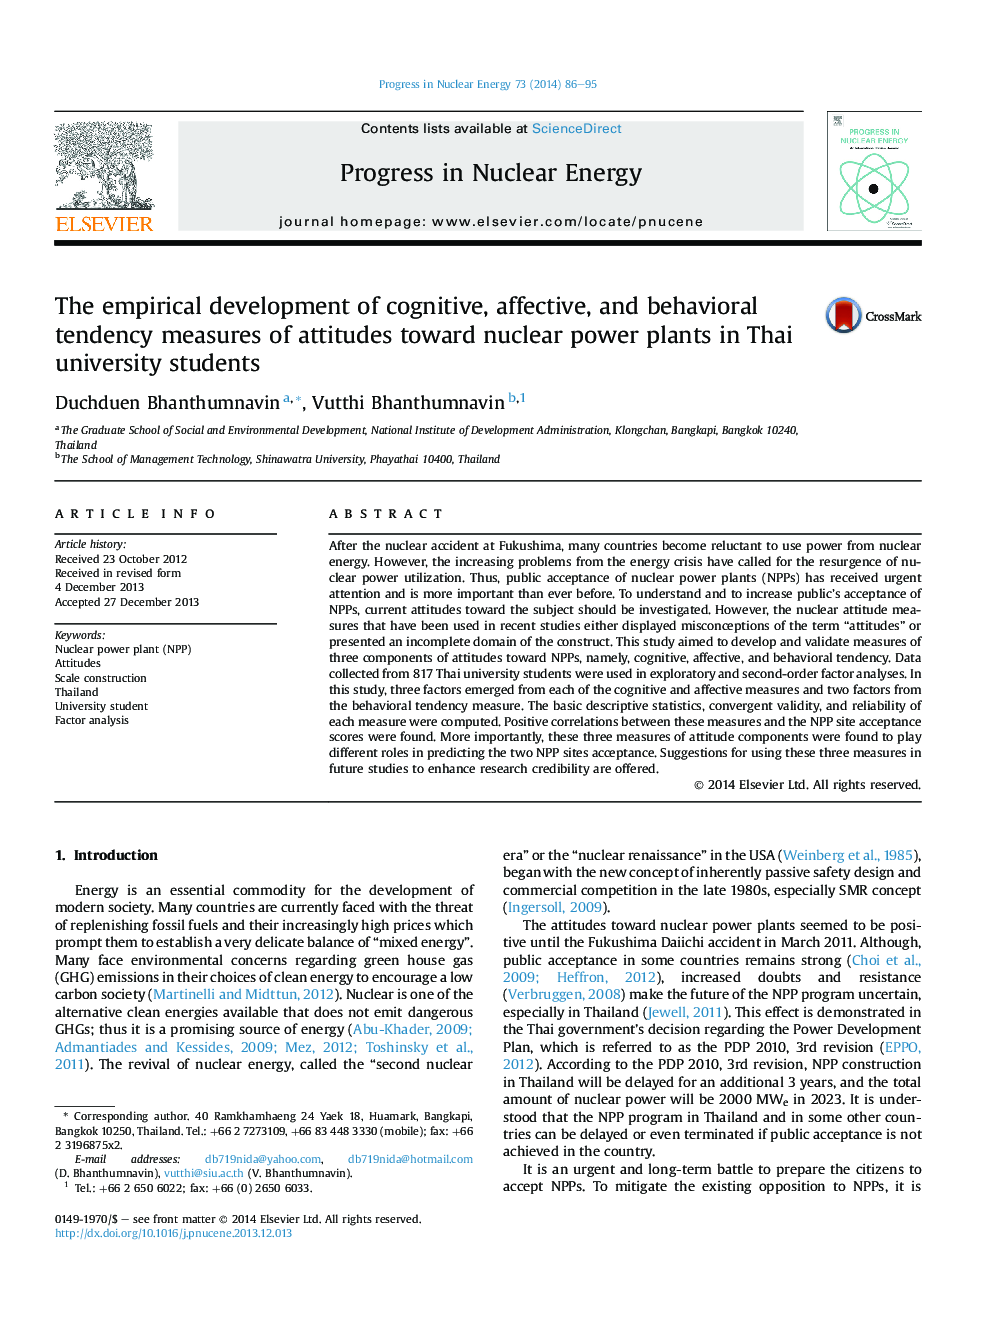 The empirical development of cognitive, affective, and behavioral tendency measures of attitudes toward nuclear power plants in Thai university students